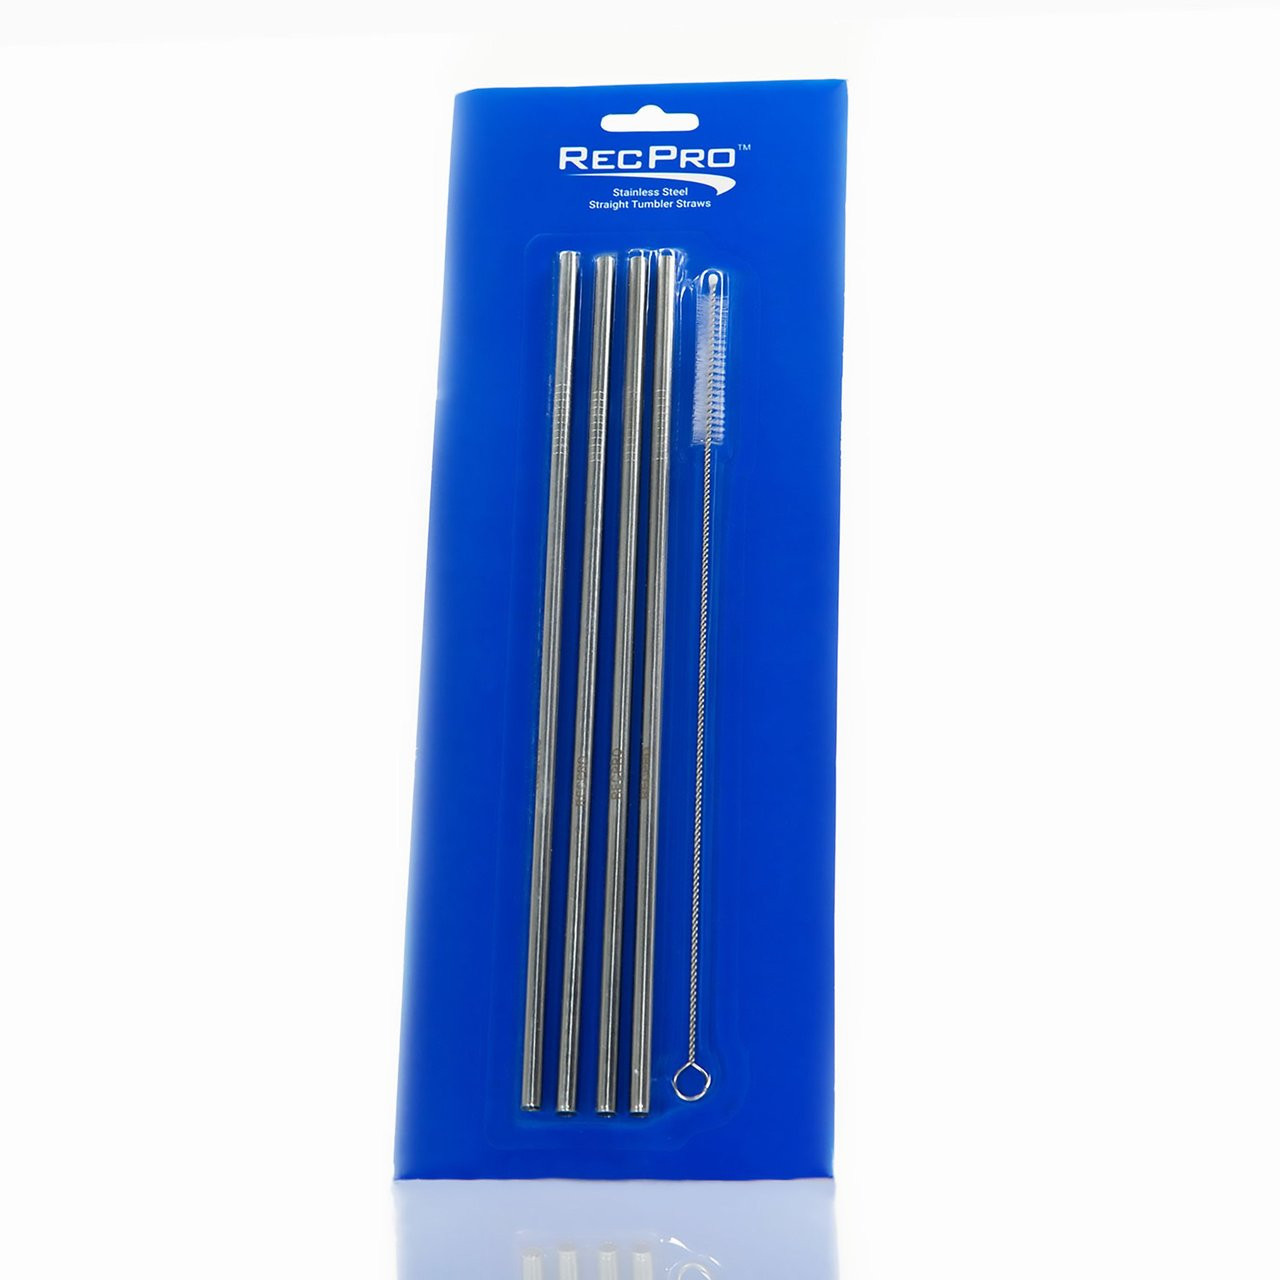 https://cdn11.bigcommerce.com/s-kwuh809851/images/stencil/1280x1280/products/146/1303/striaght-straw-packaging__35724.1511193308.jpg?c=2